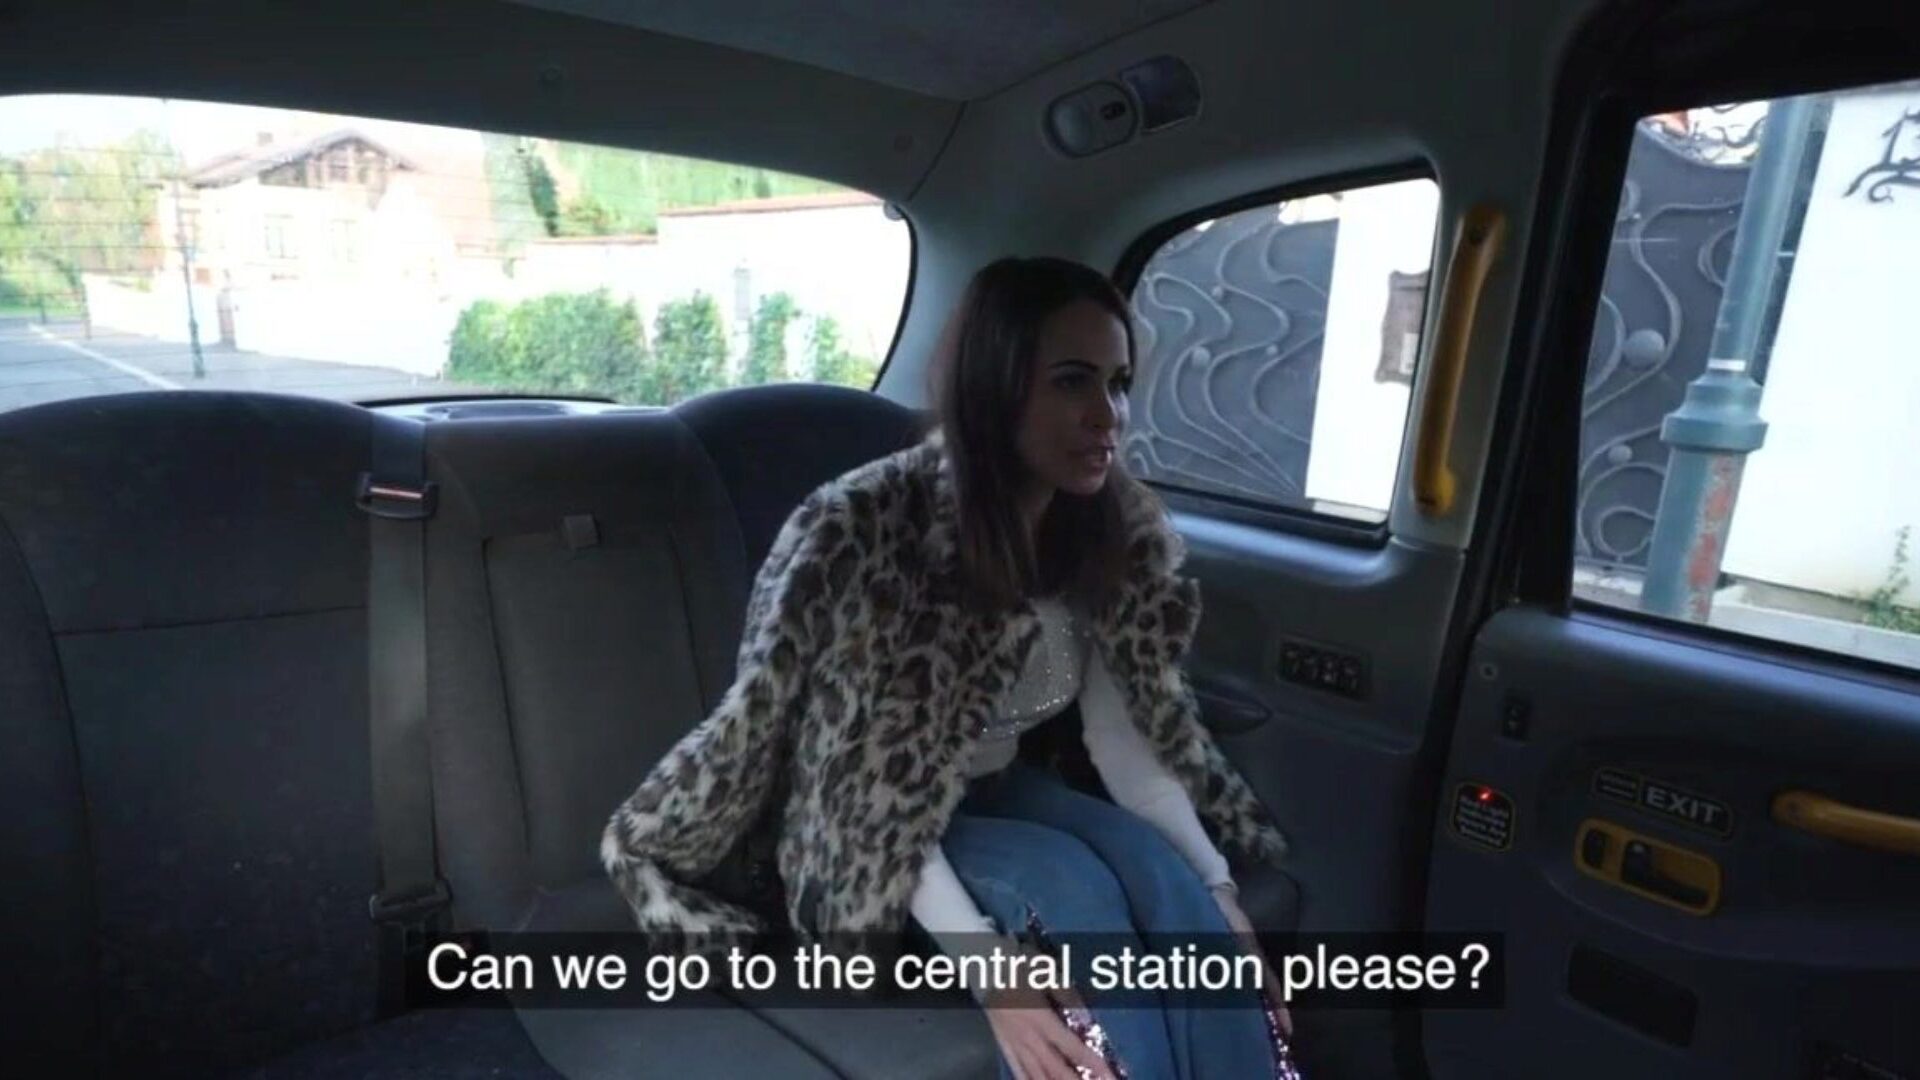 Fake Taxi Jessy Jey Gives Cheeky Cabbie a Breakdown Fuck